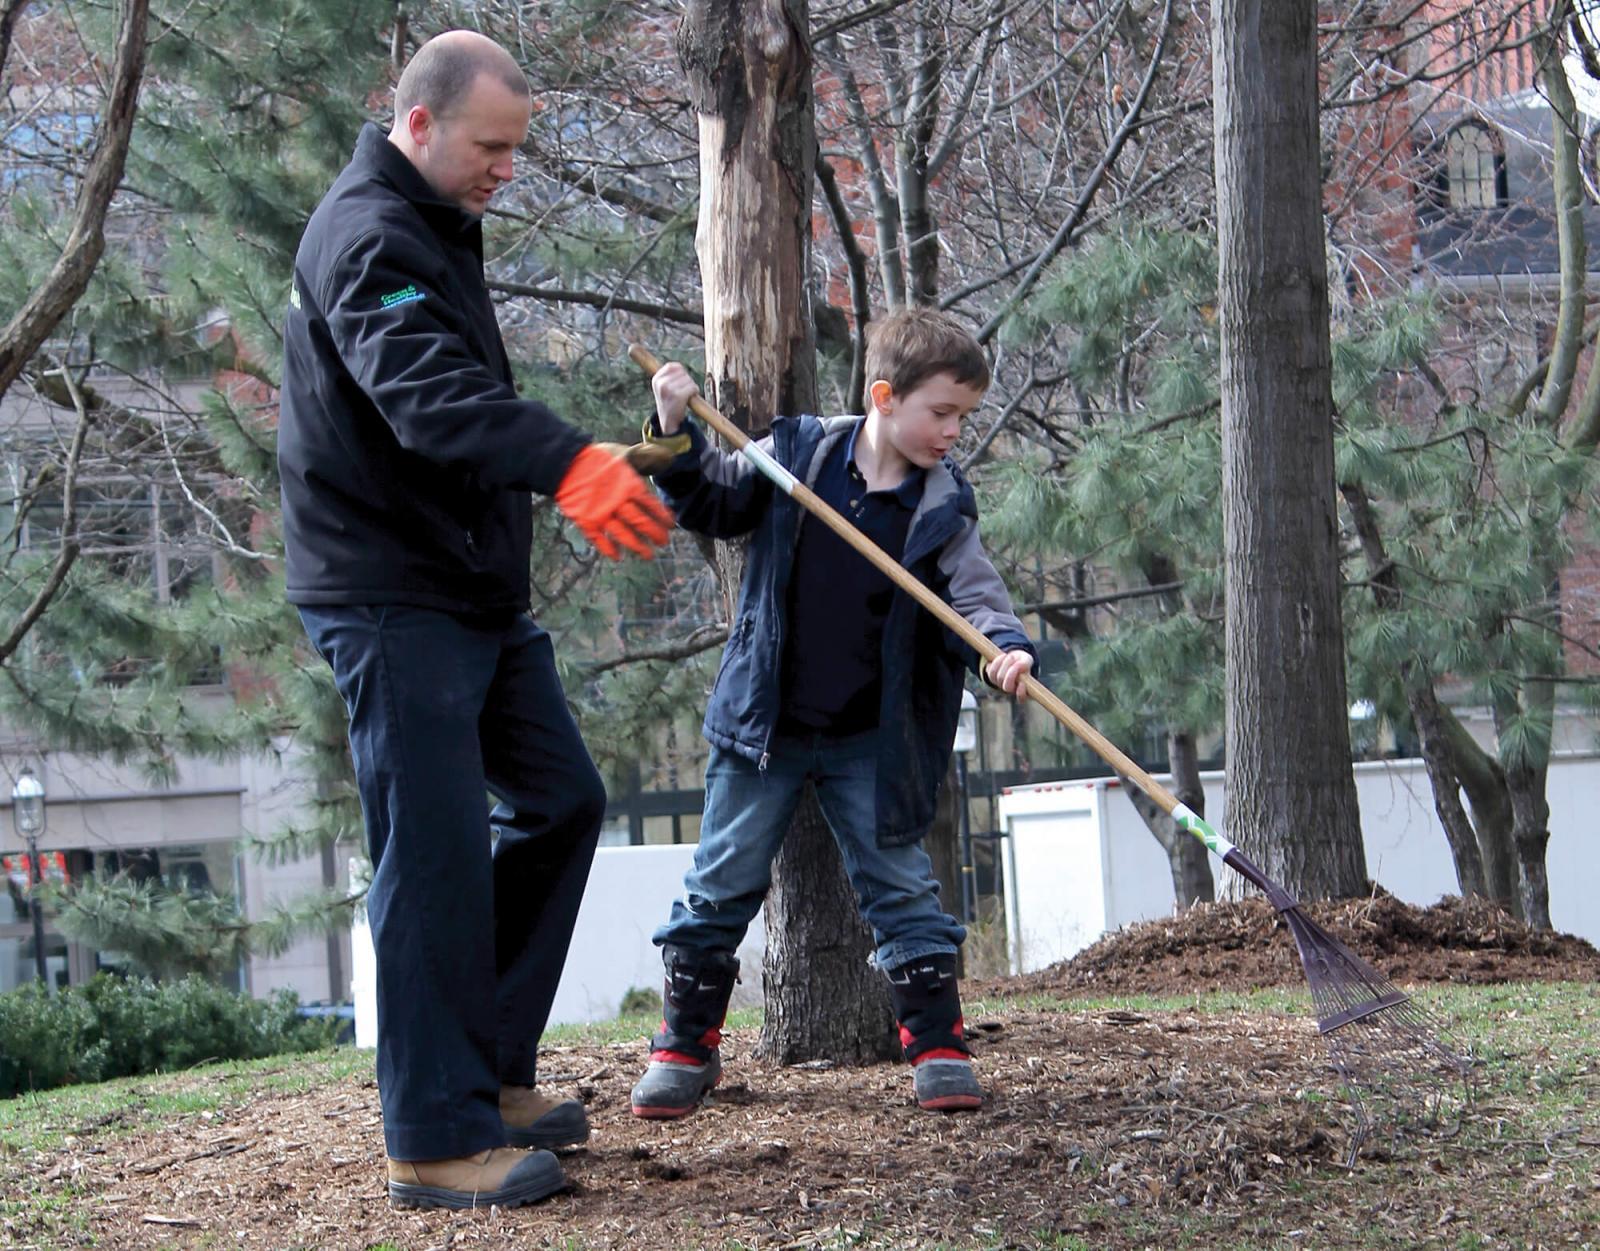 Kyle Tobin took time to teach his nephews about raking the right way.